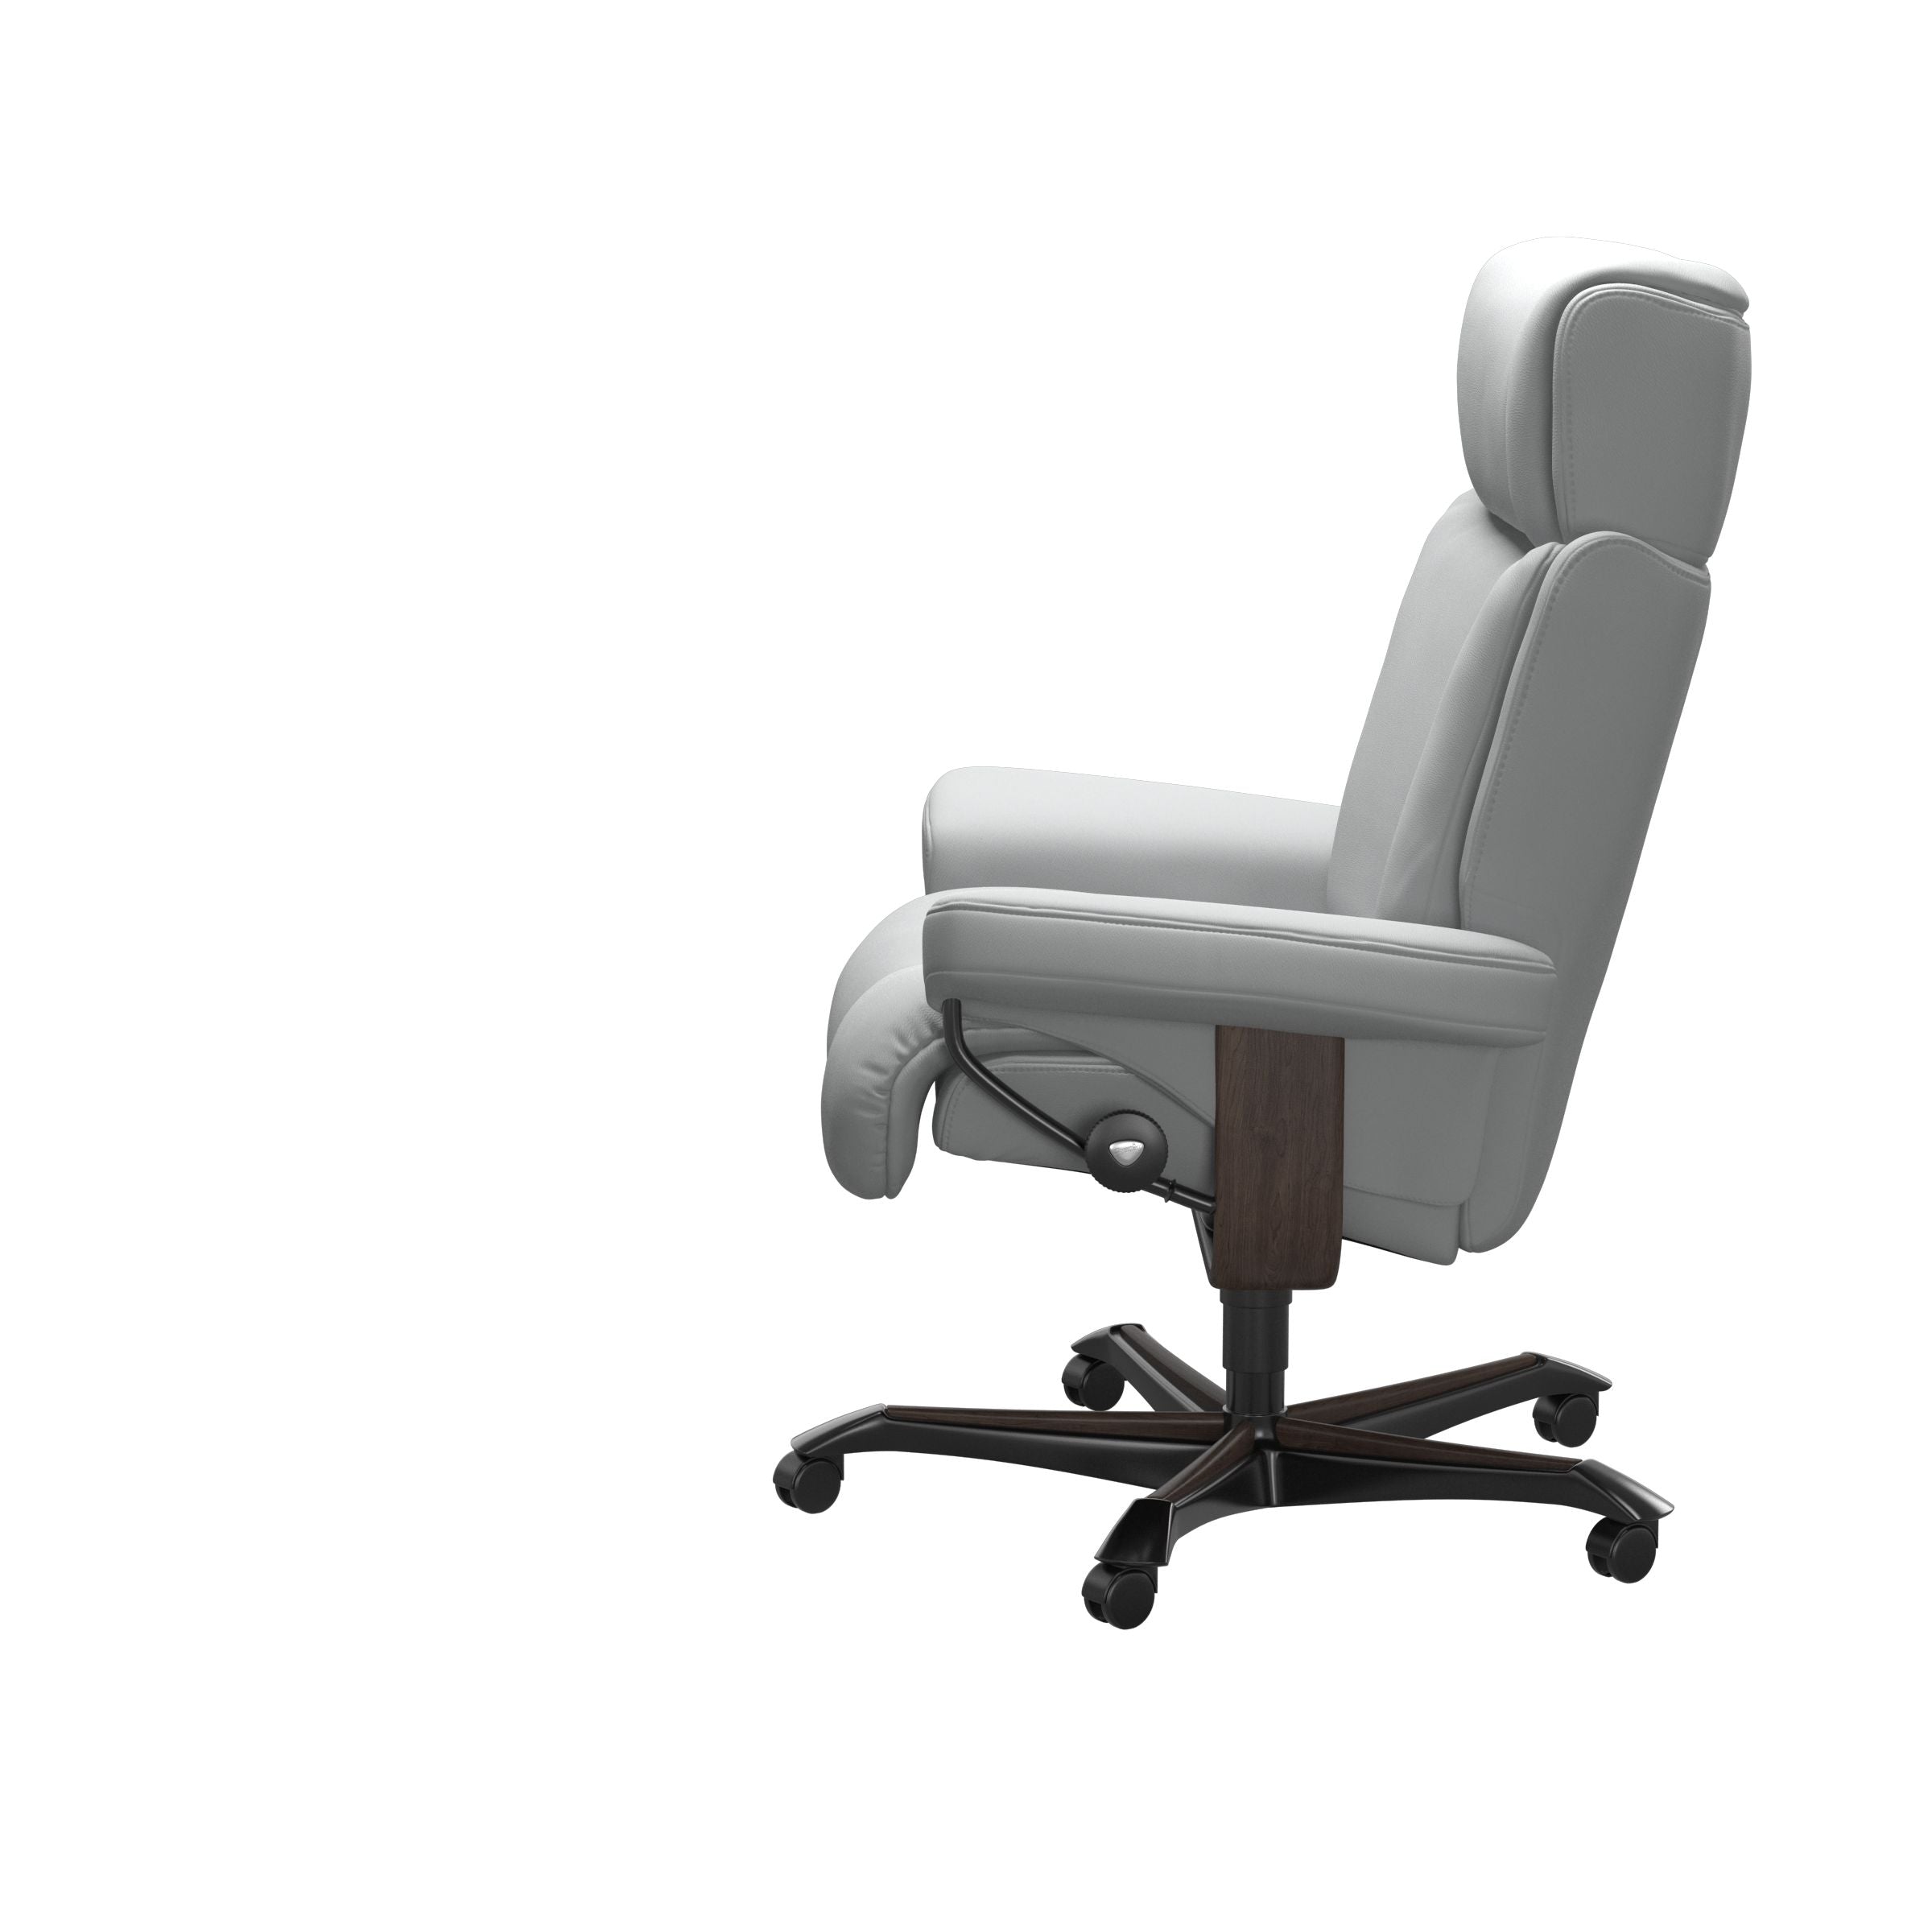 Stressless Magic Leather Office Chair